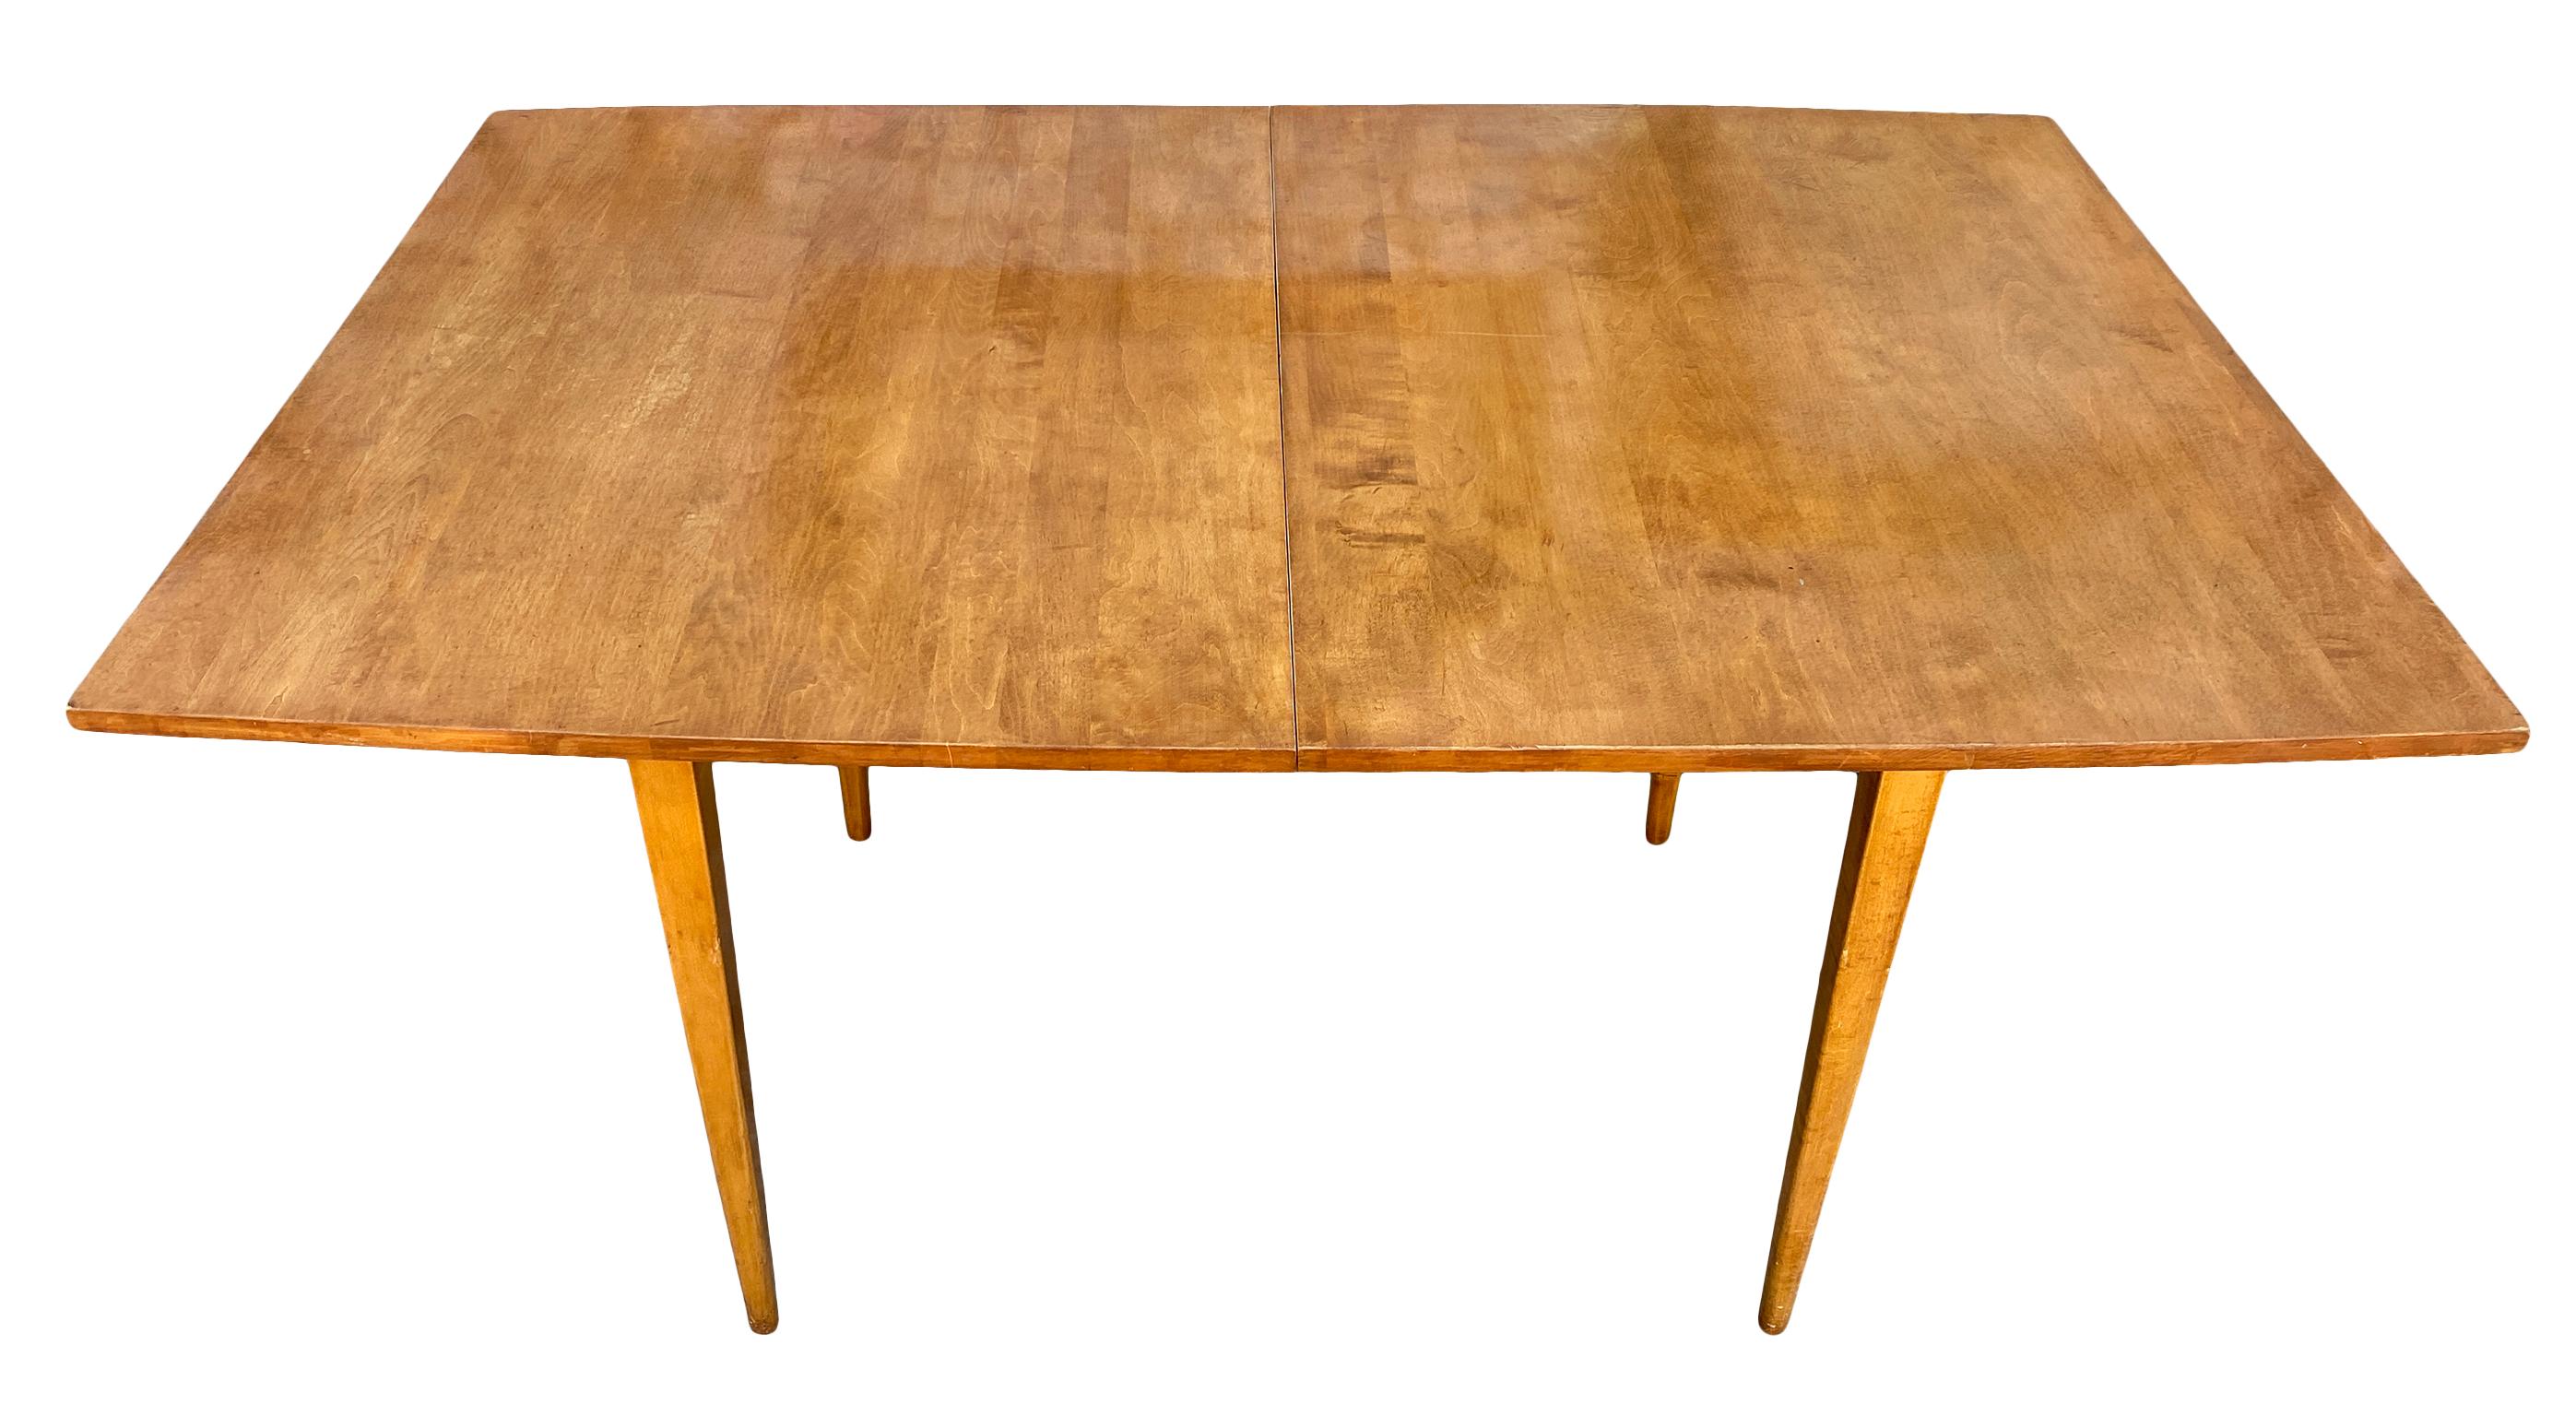 Beautiful early 1950s Paul McCobb solid maple extention dining table on 4 squared tapered legs. Stunning solid maple tabletop with a slight taper on each end that has a tobacco semi gloss blonde finish in great vintage condition has 2 narrow leaves.